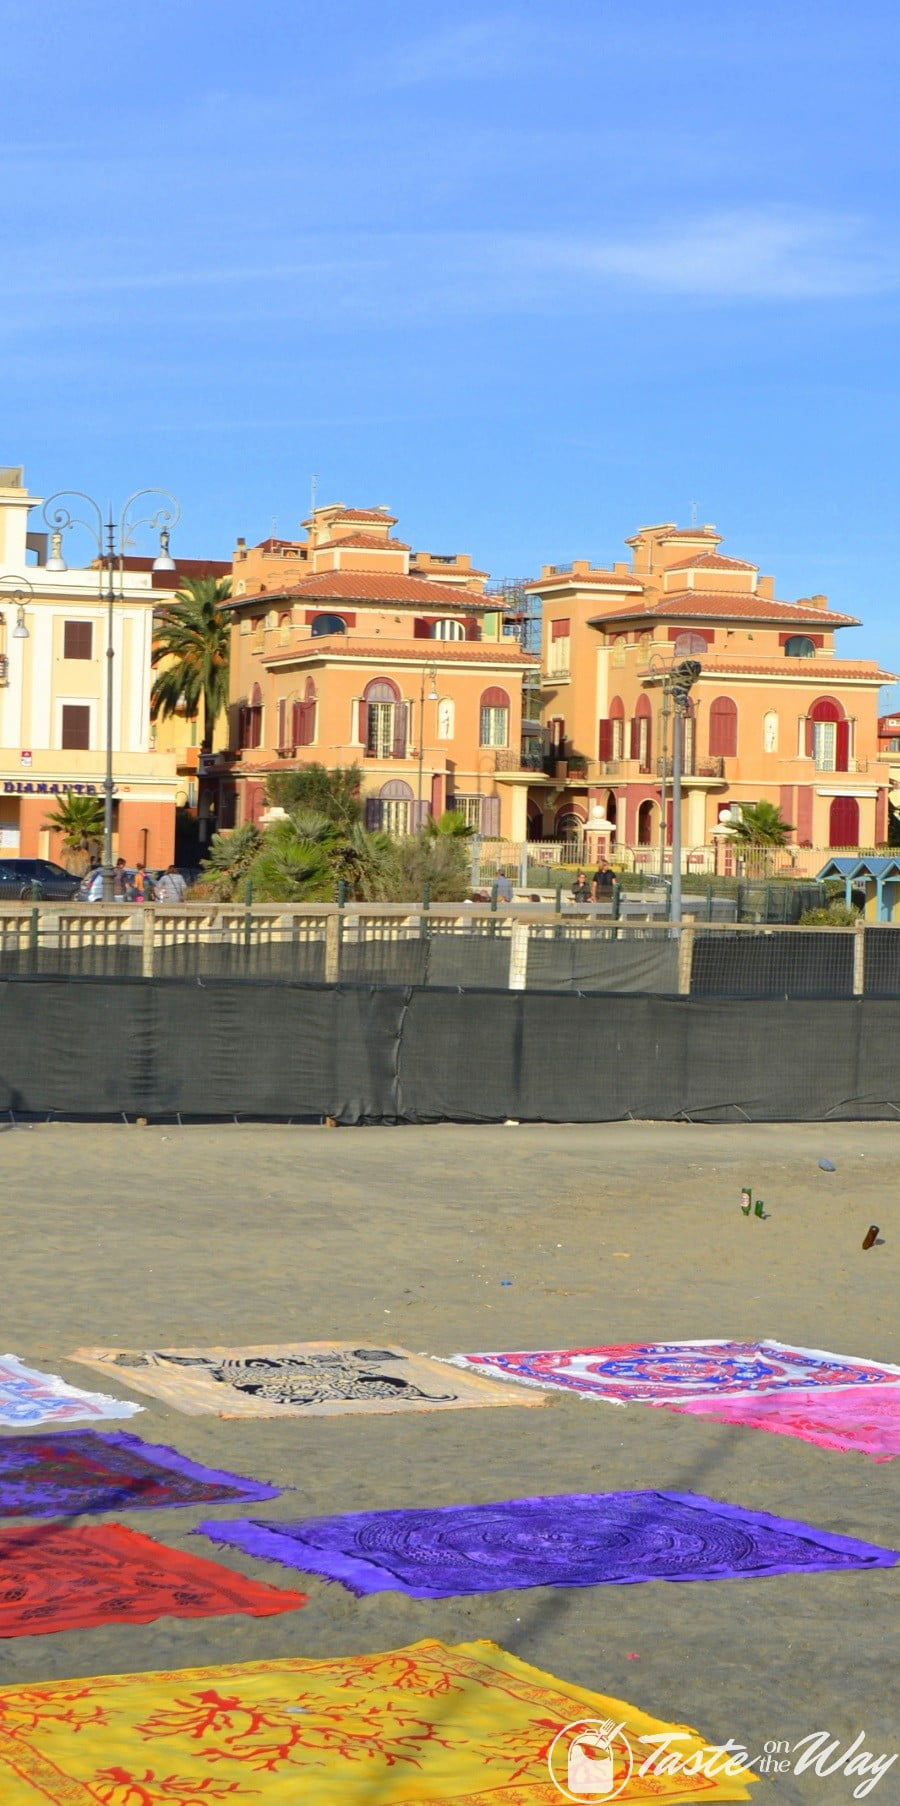 Going to the beach in Ostia is one of the top #thingstodo in #Rome, #Italy. Check out for more! #travel #photography